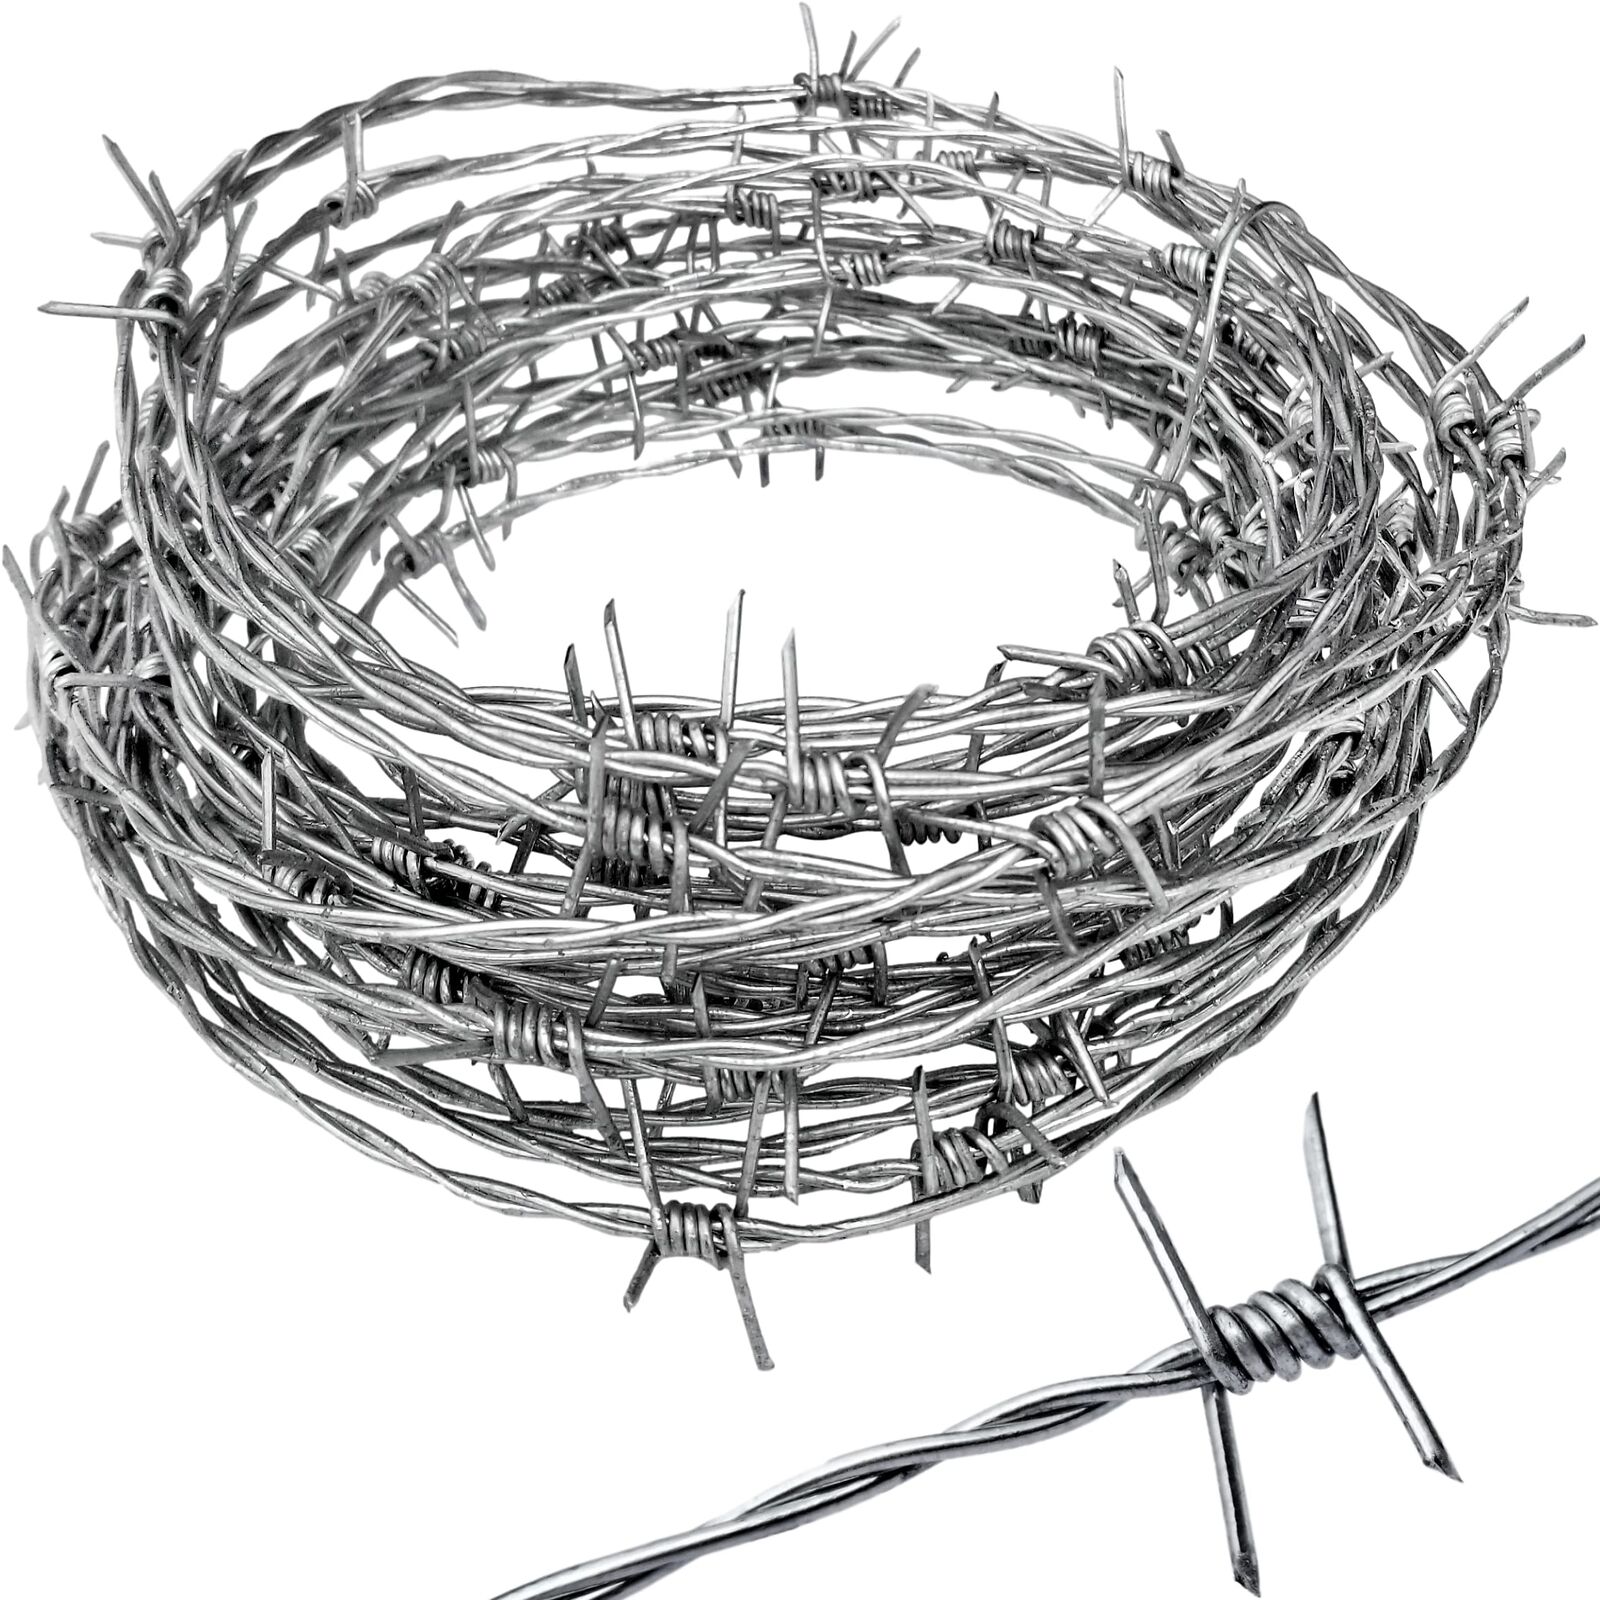 Real Barbed Wire - 18 Gauge 4 PT - (25 Feet) Light Duty - More Flexible -